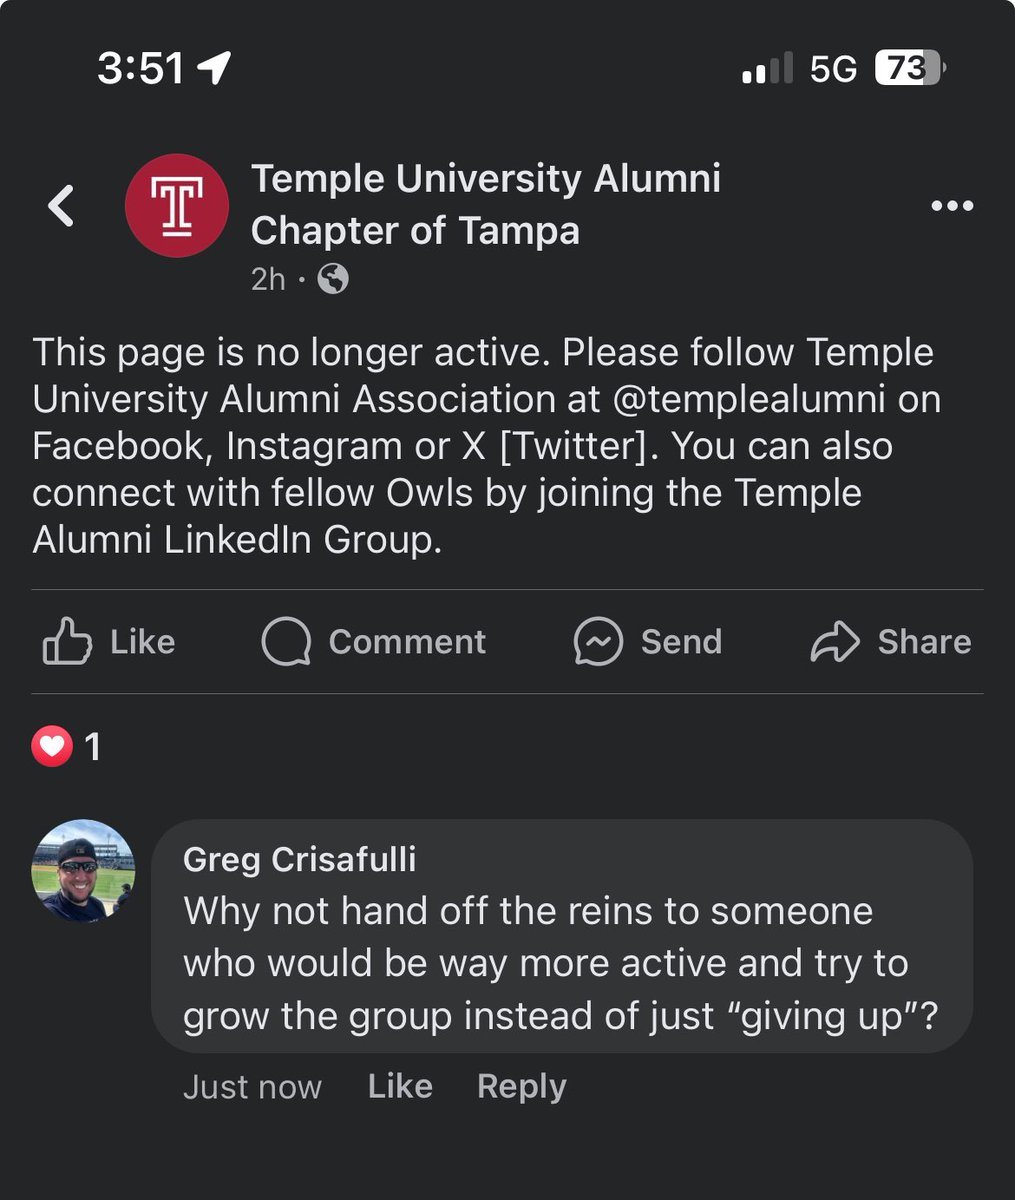 Hey @TempleAlumni hand off this account to someone who lives in the area and cares about Temple. Someone like me